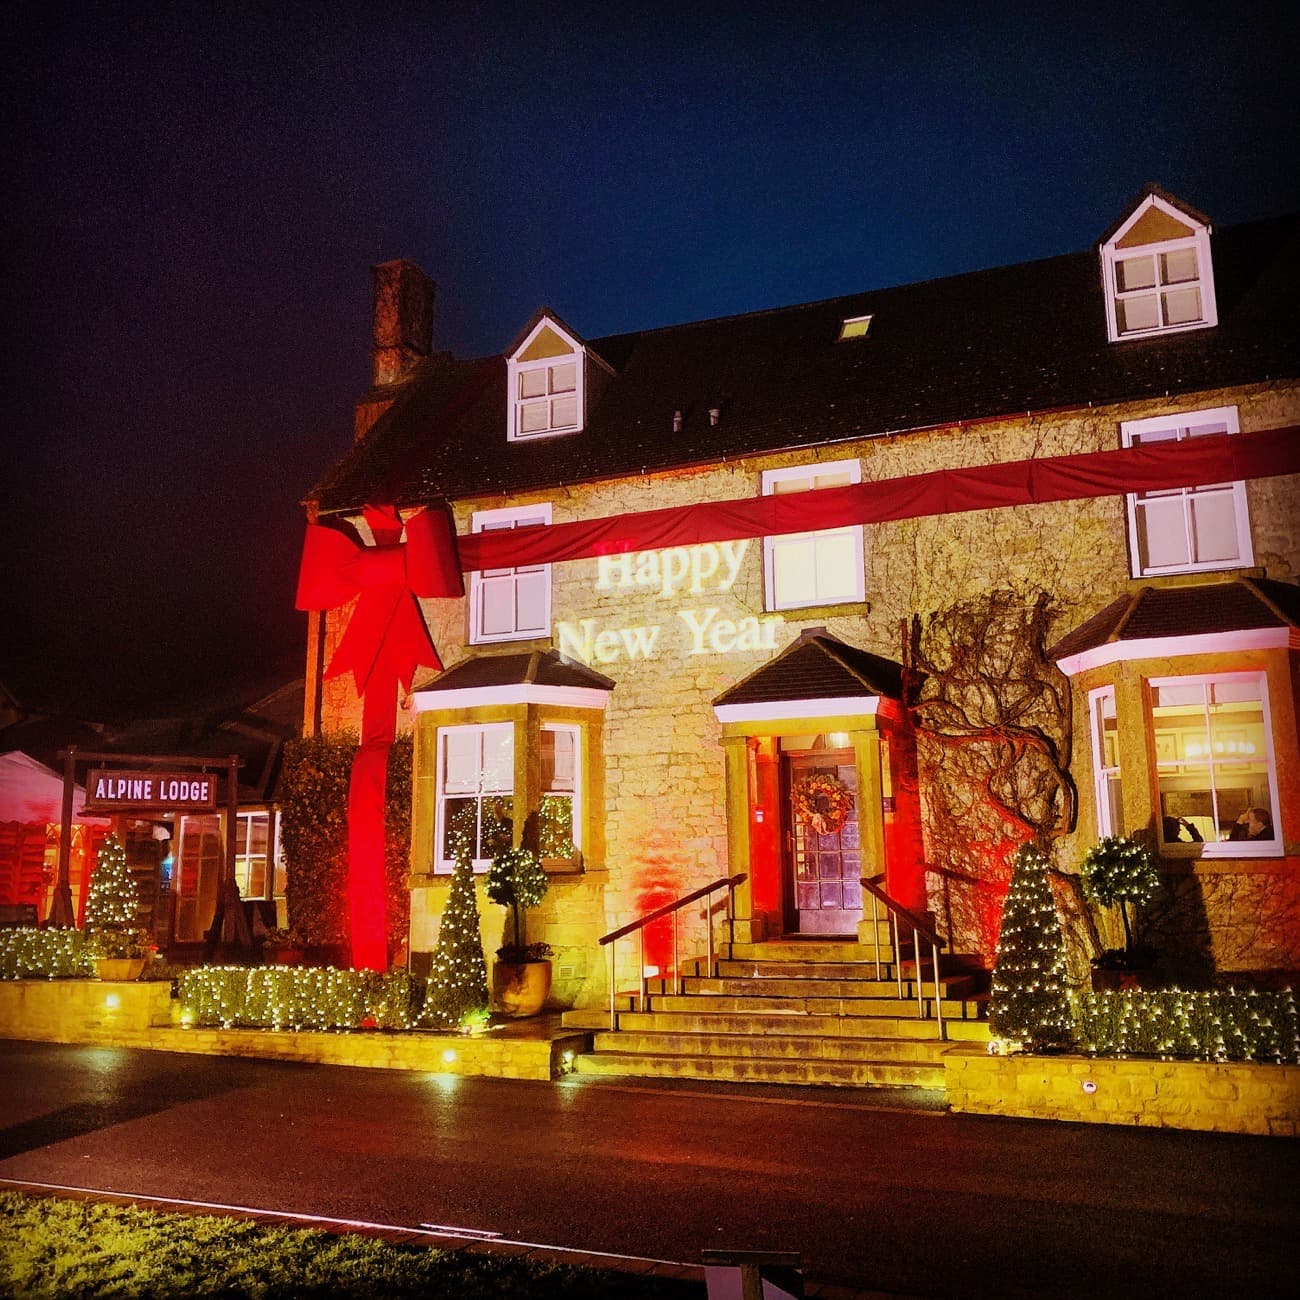 Dormy House with a giant red bow on the front of the house